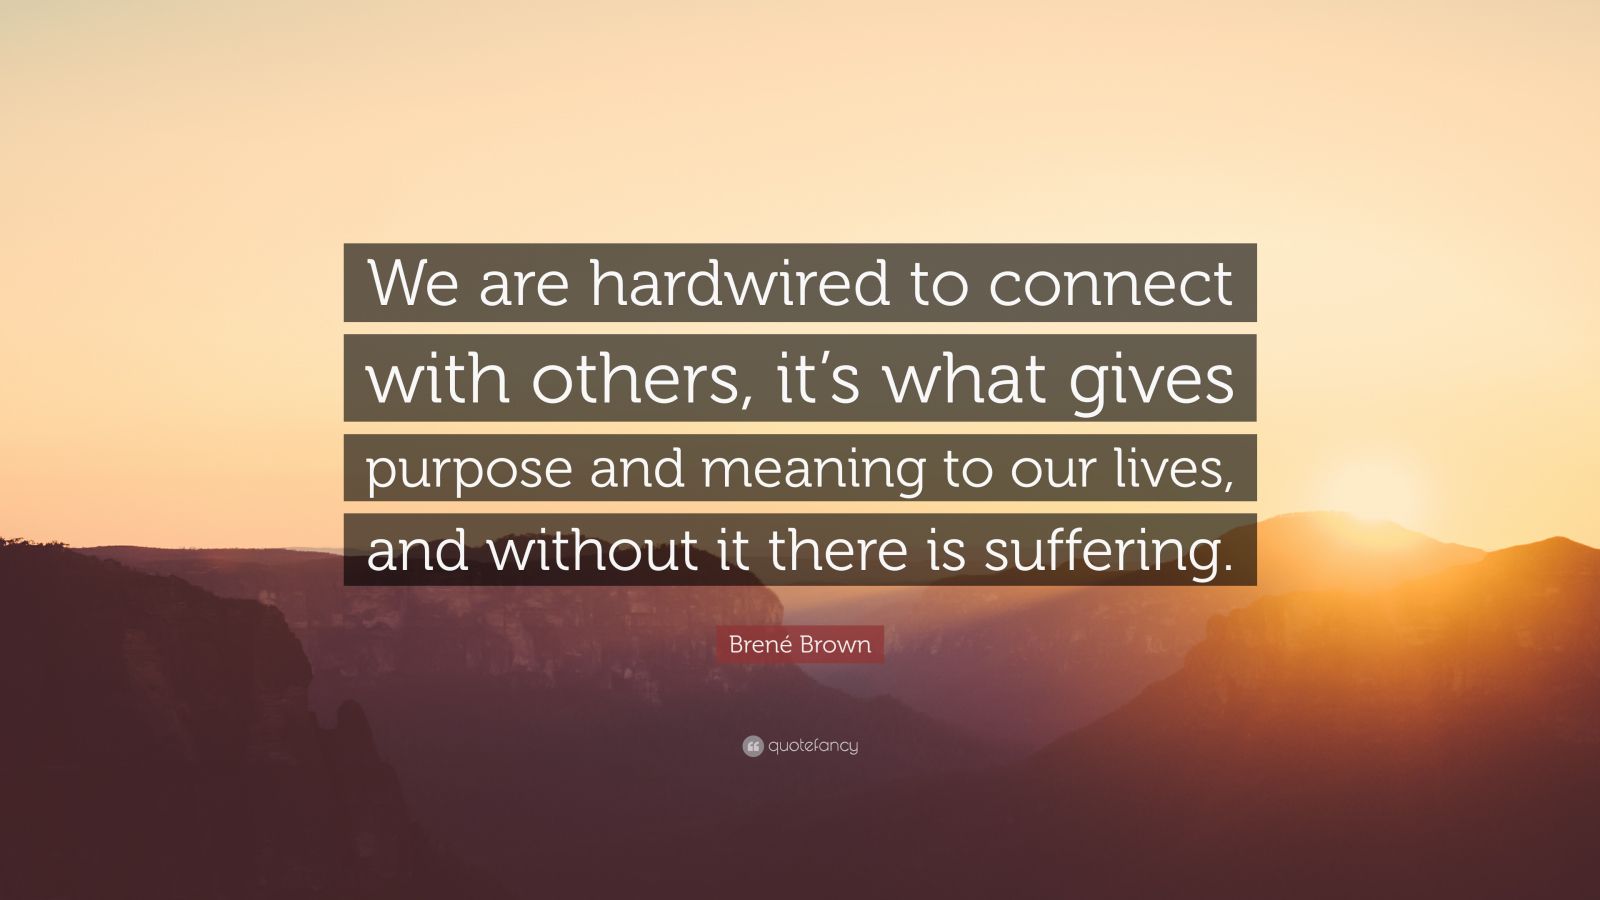 Brené Brown Quote: “We are hardwired to connect with others, it’s what